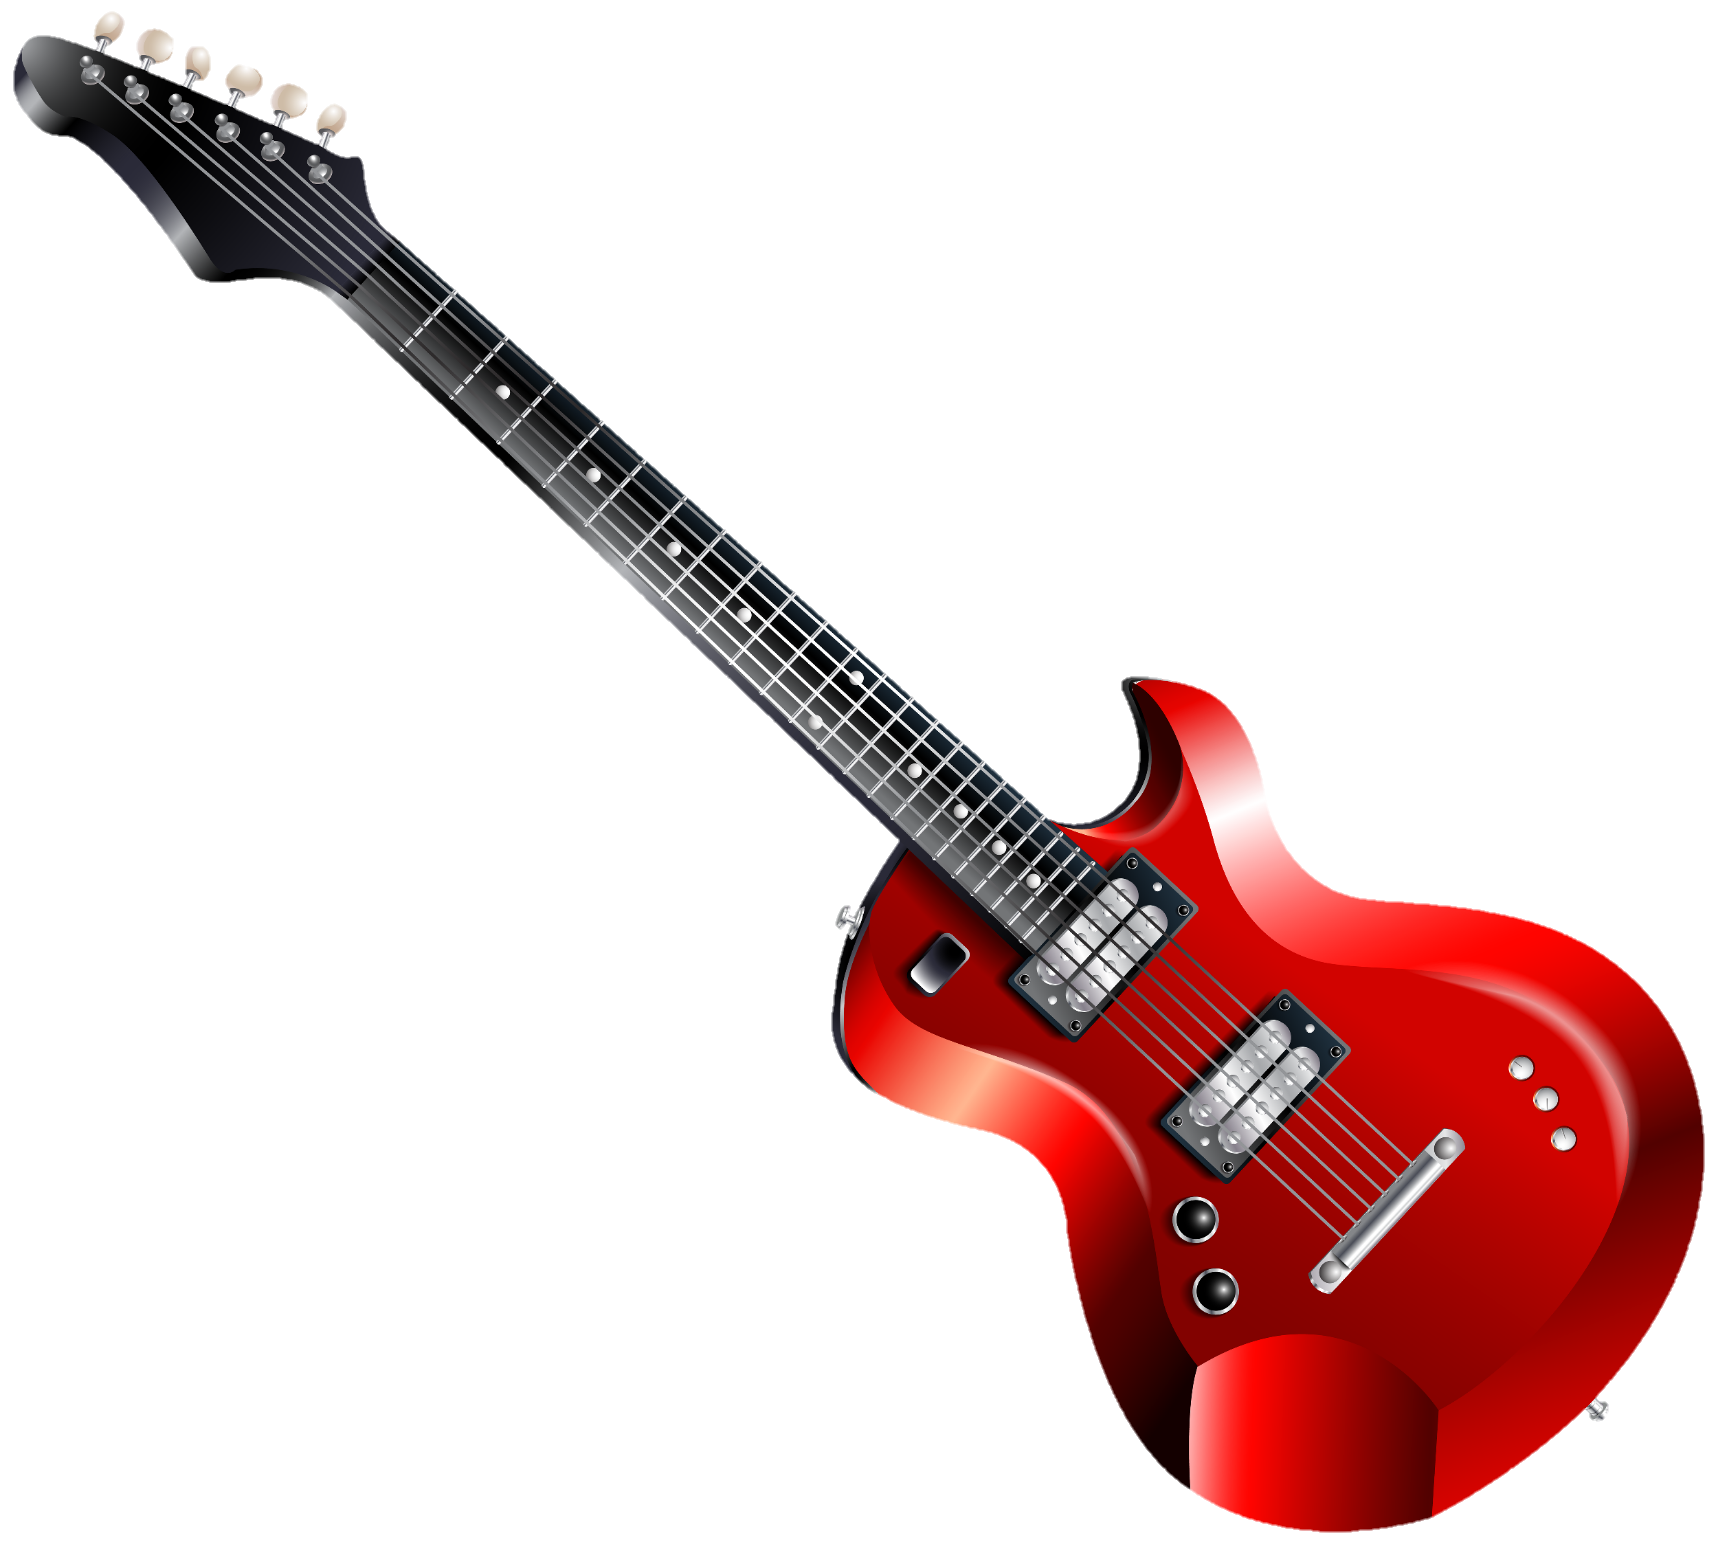 guitar-png-image-from-pngfre-15